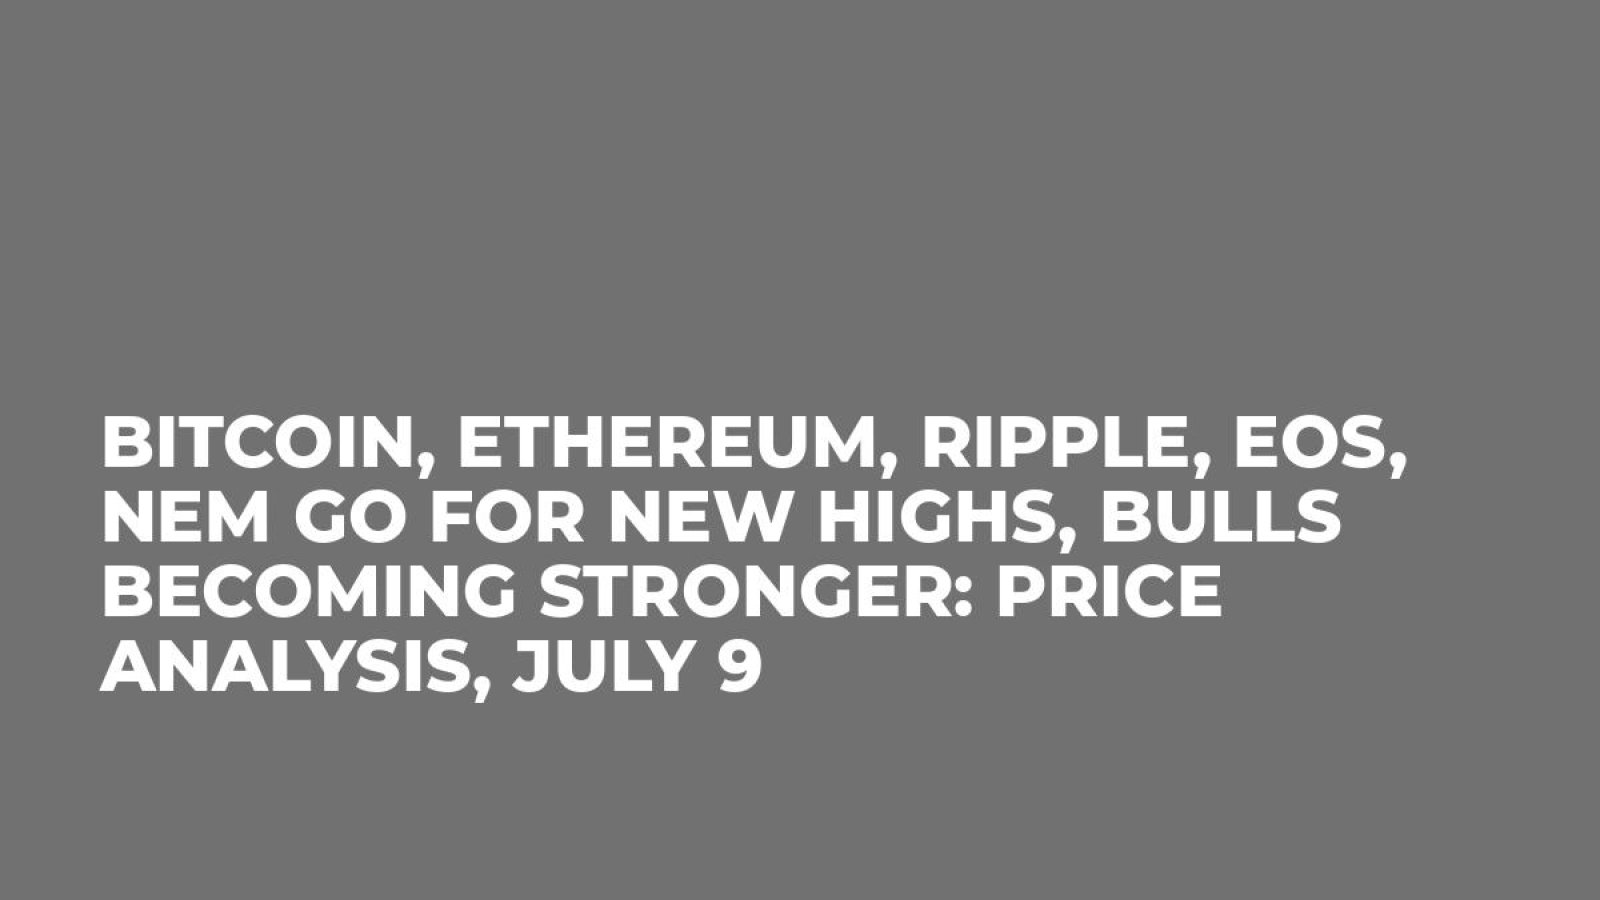 Bitcoin, Ethereum, Ripple, EOS, NEM Go for New Highs, Bulls Becoming Stronger: Price Analysis, July 9